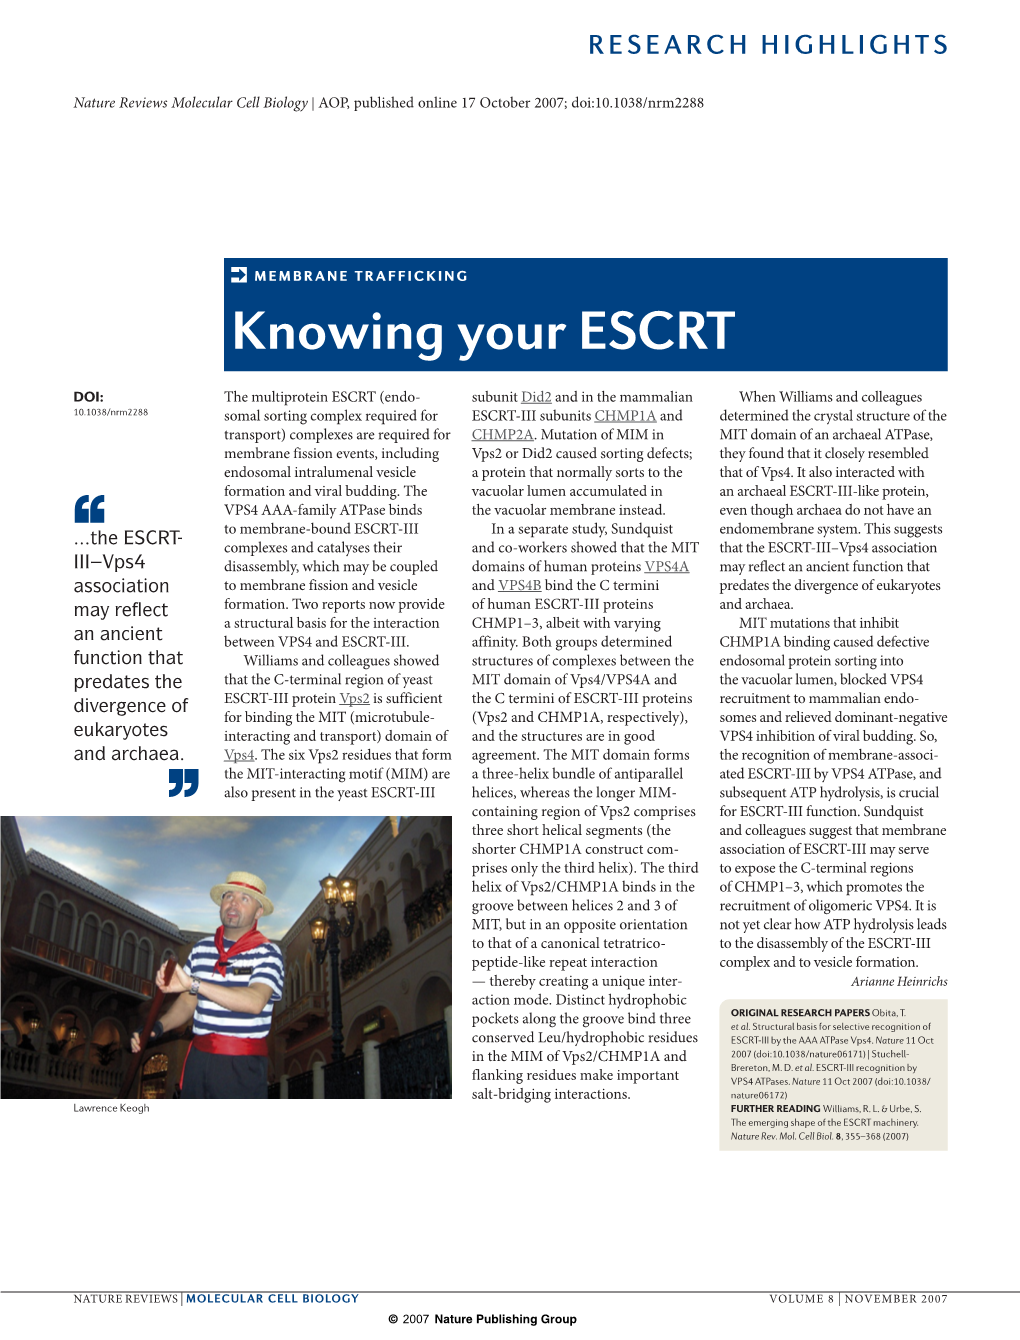 Knowing Your ESCRT